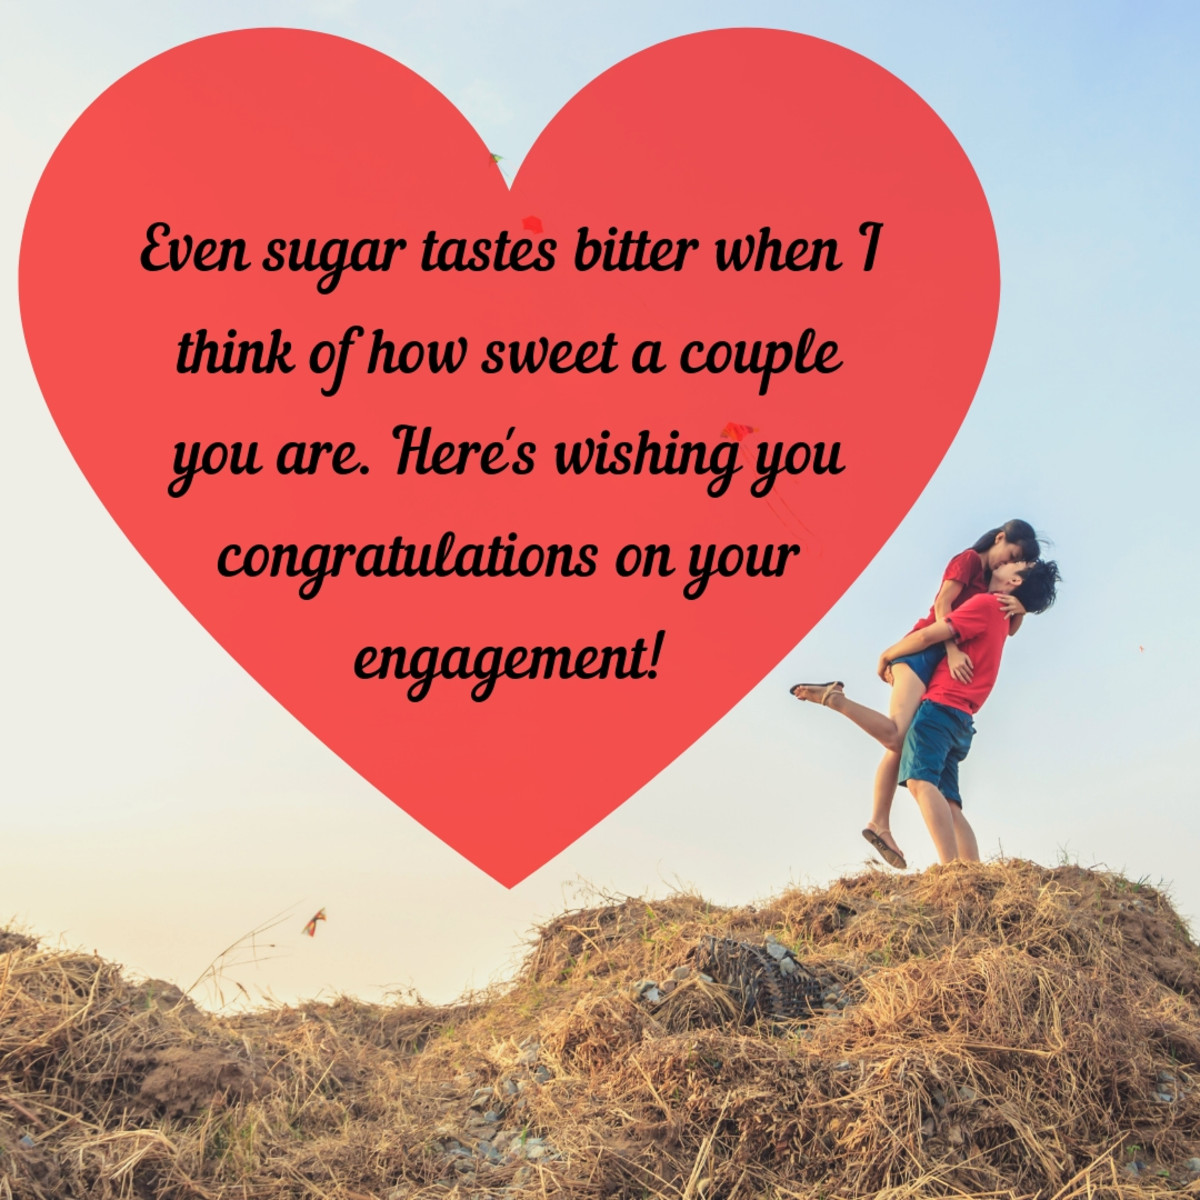 Weddings and proposals are probably the most memorable aspects of an engagement, but a sweet message of congratulations will not be unappreciated! 